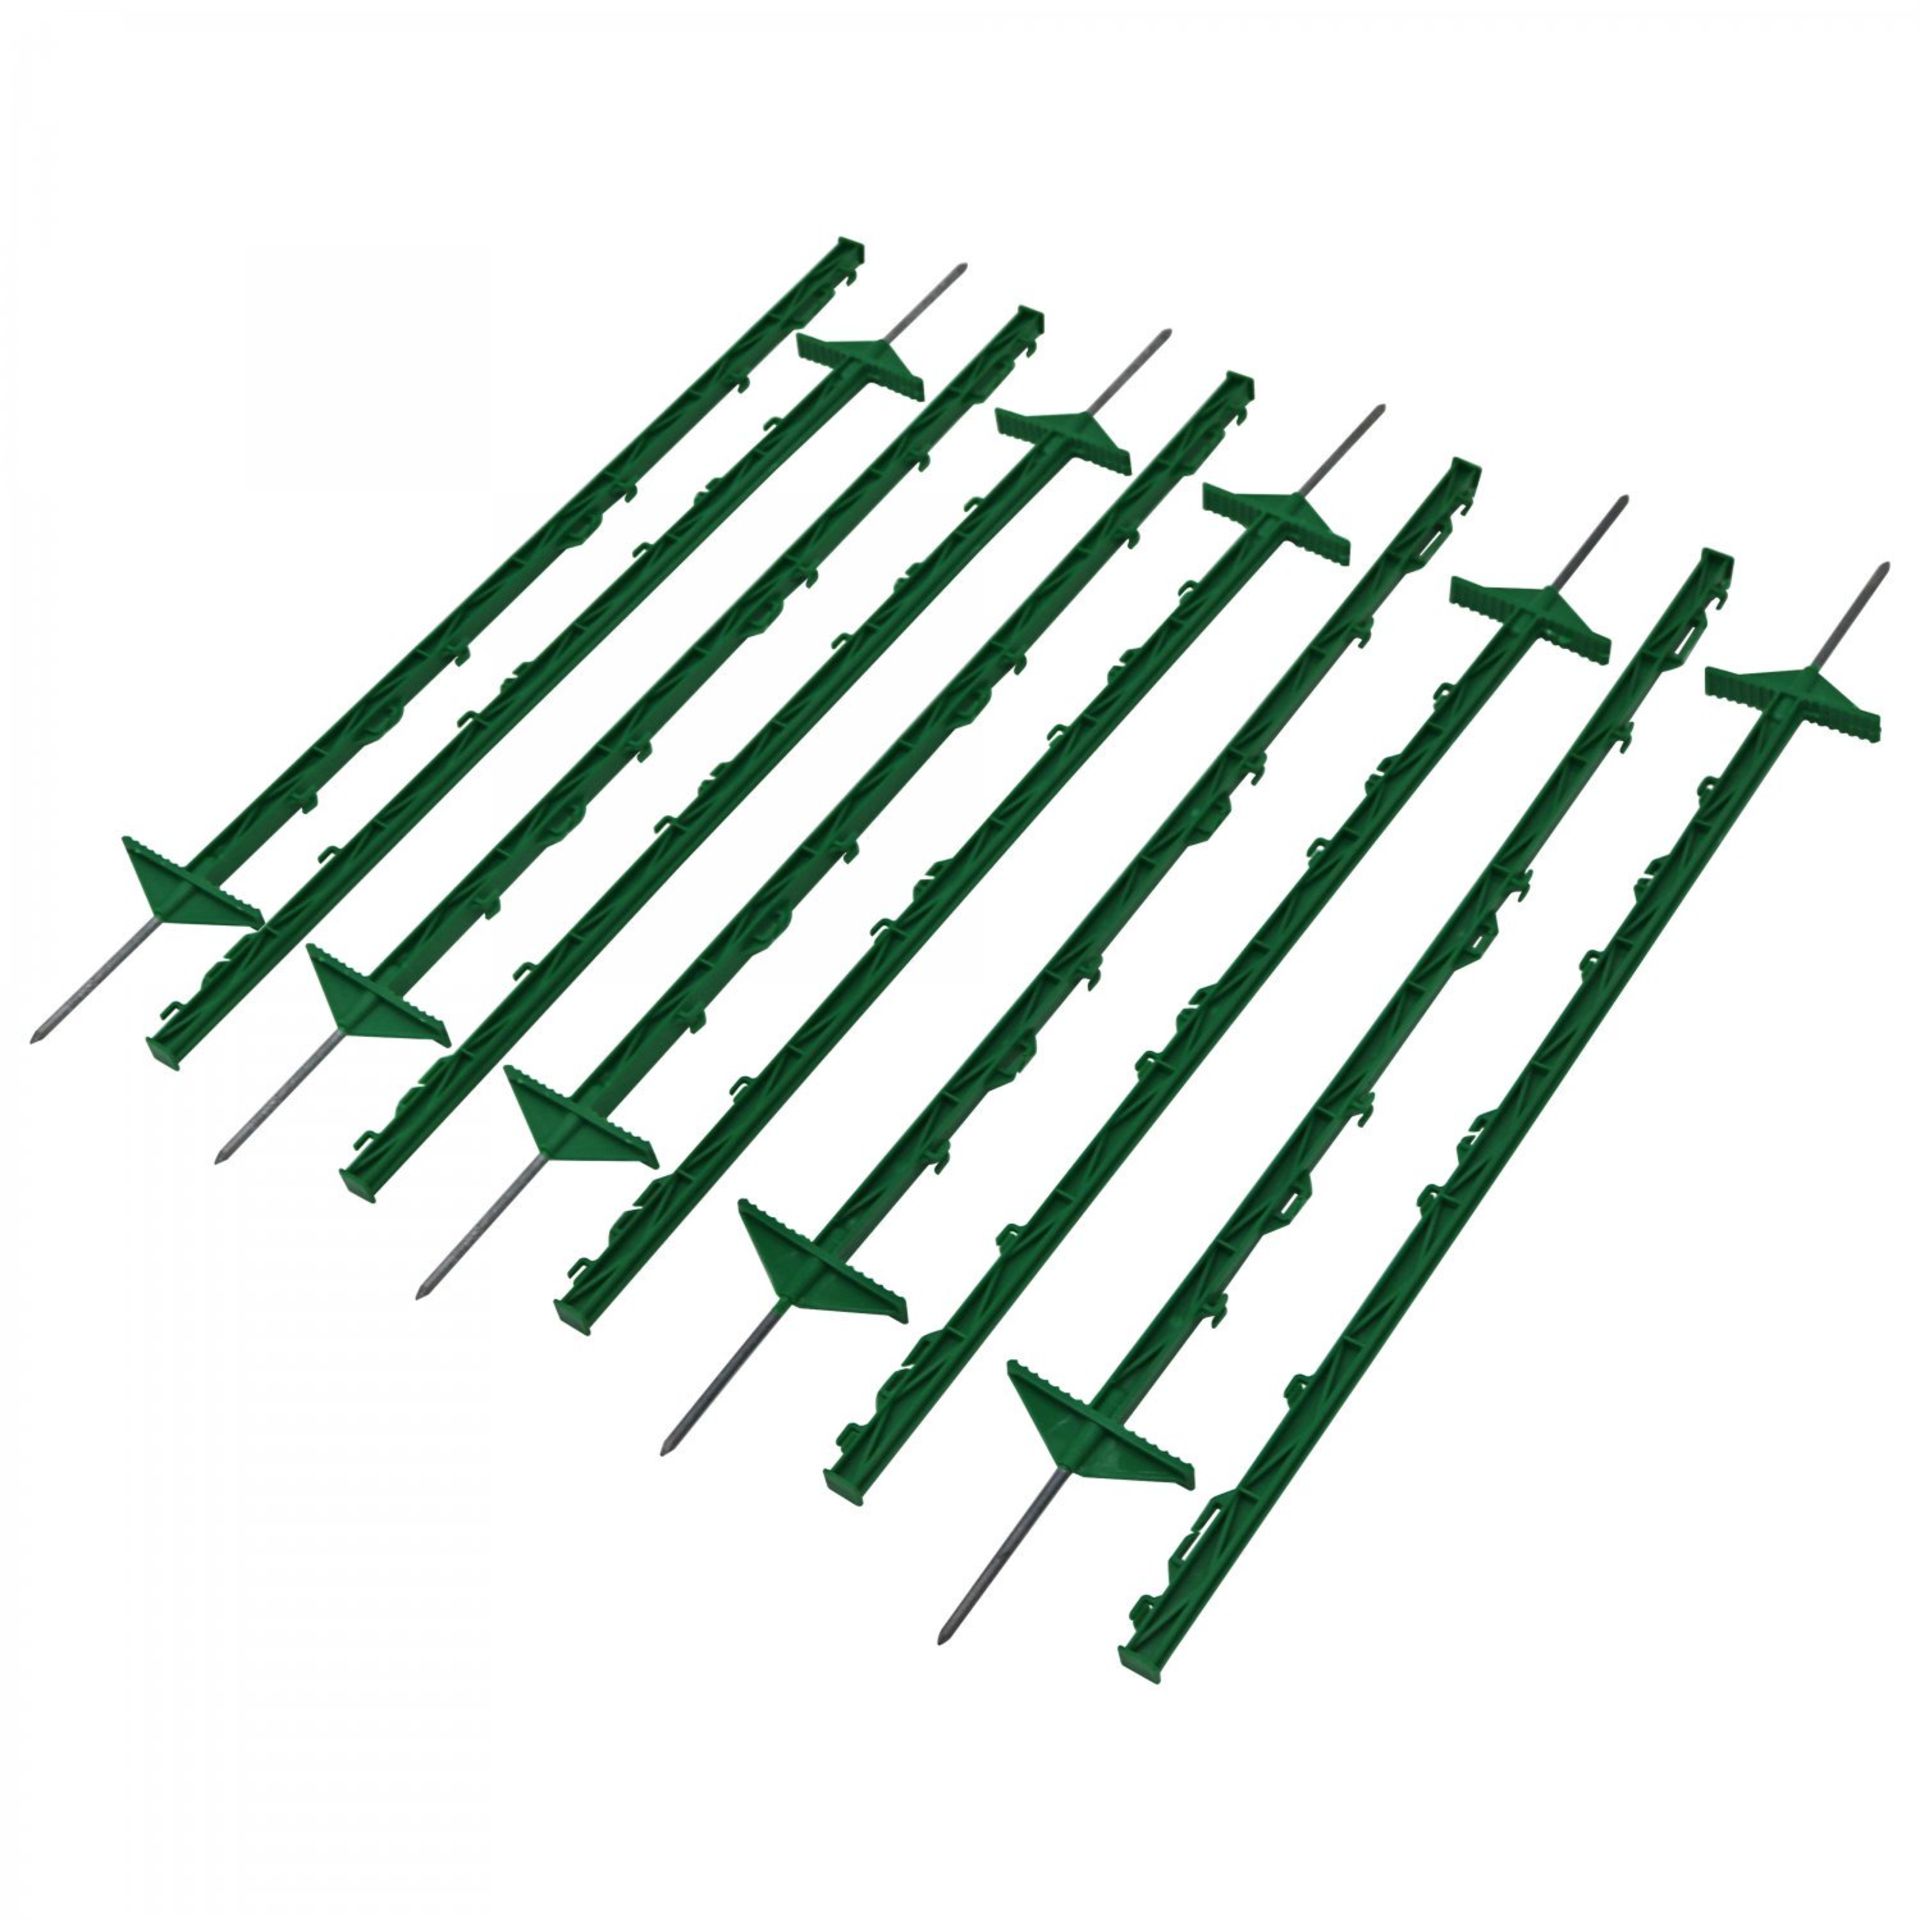 (RL95) 1m Green Plastic Electric Fencing Pins Posts Stakes Pack of 10 The fencing pins are a... - Image 2 of 2